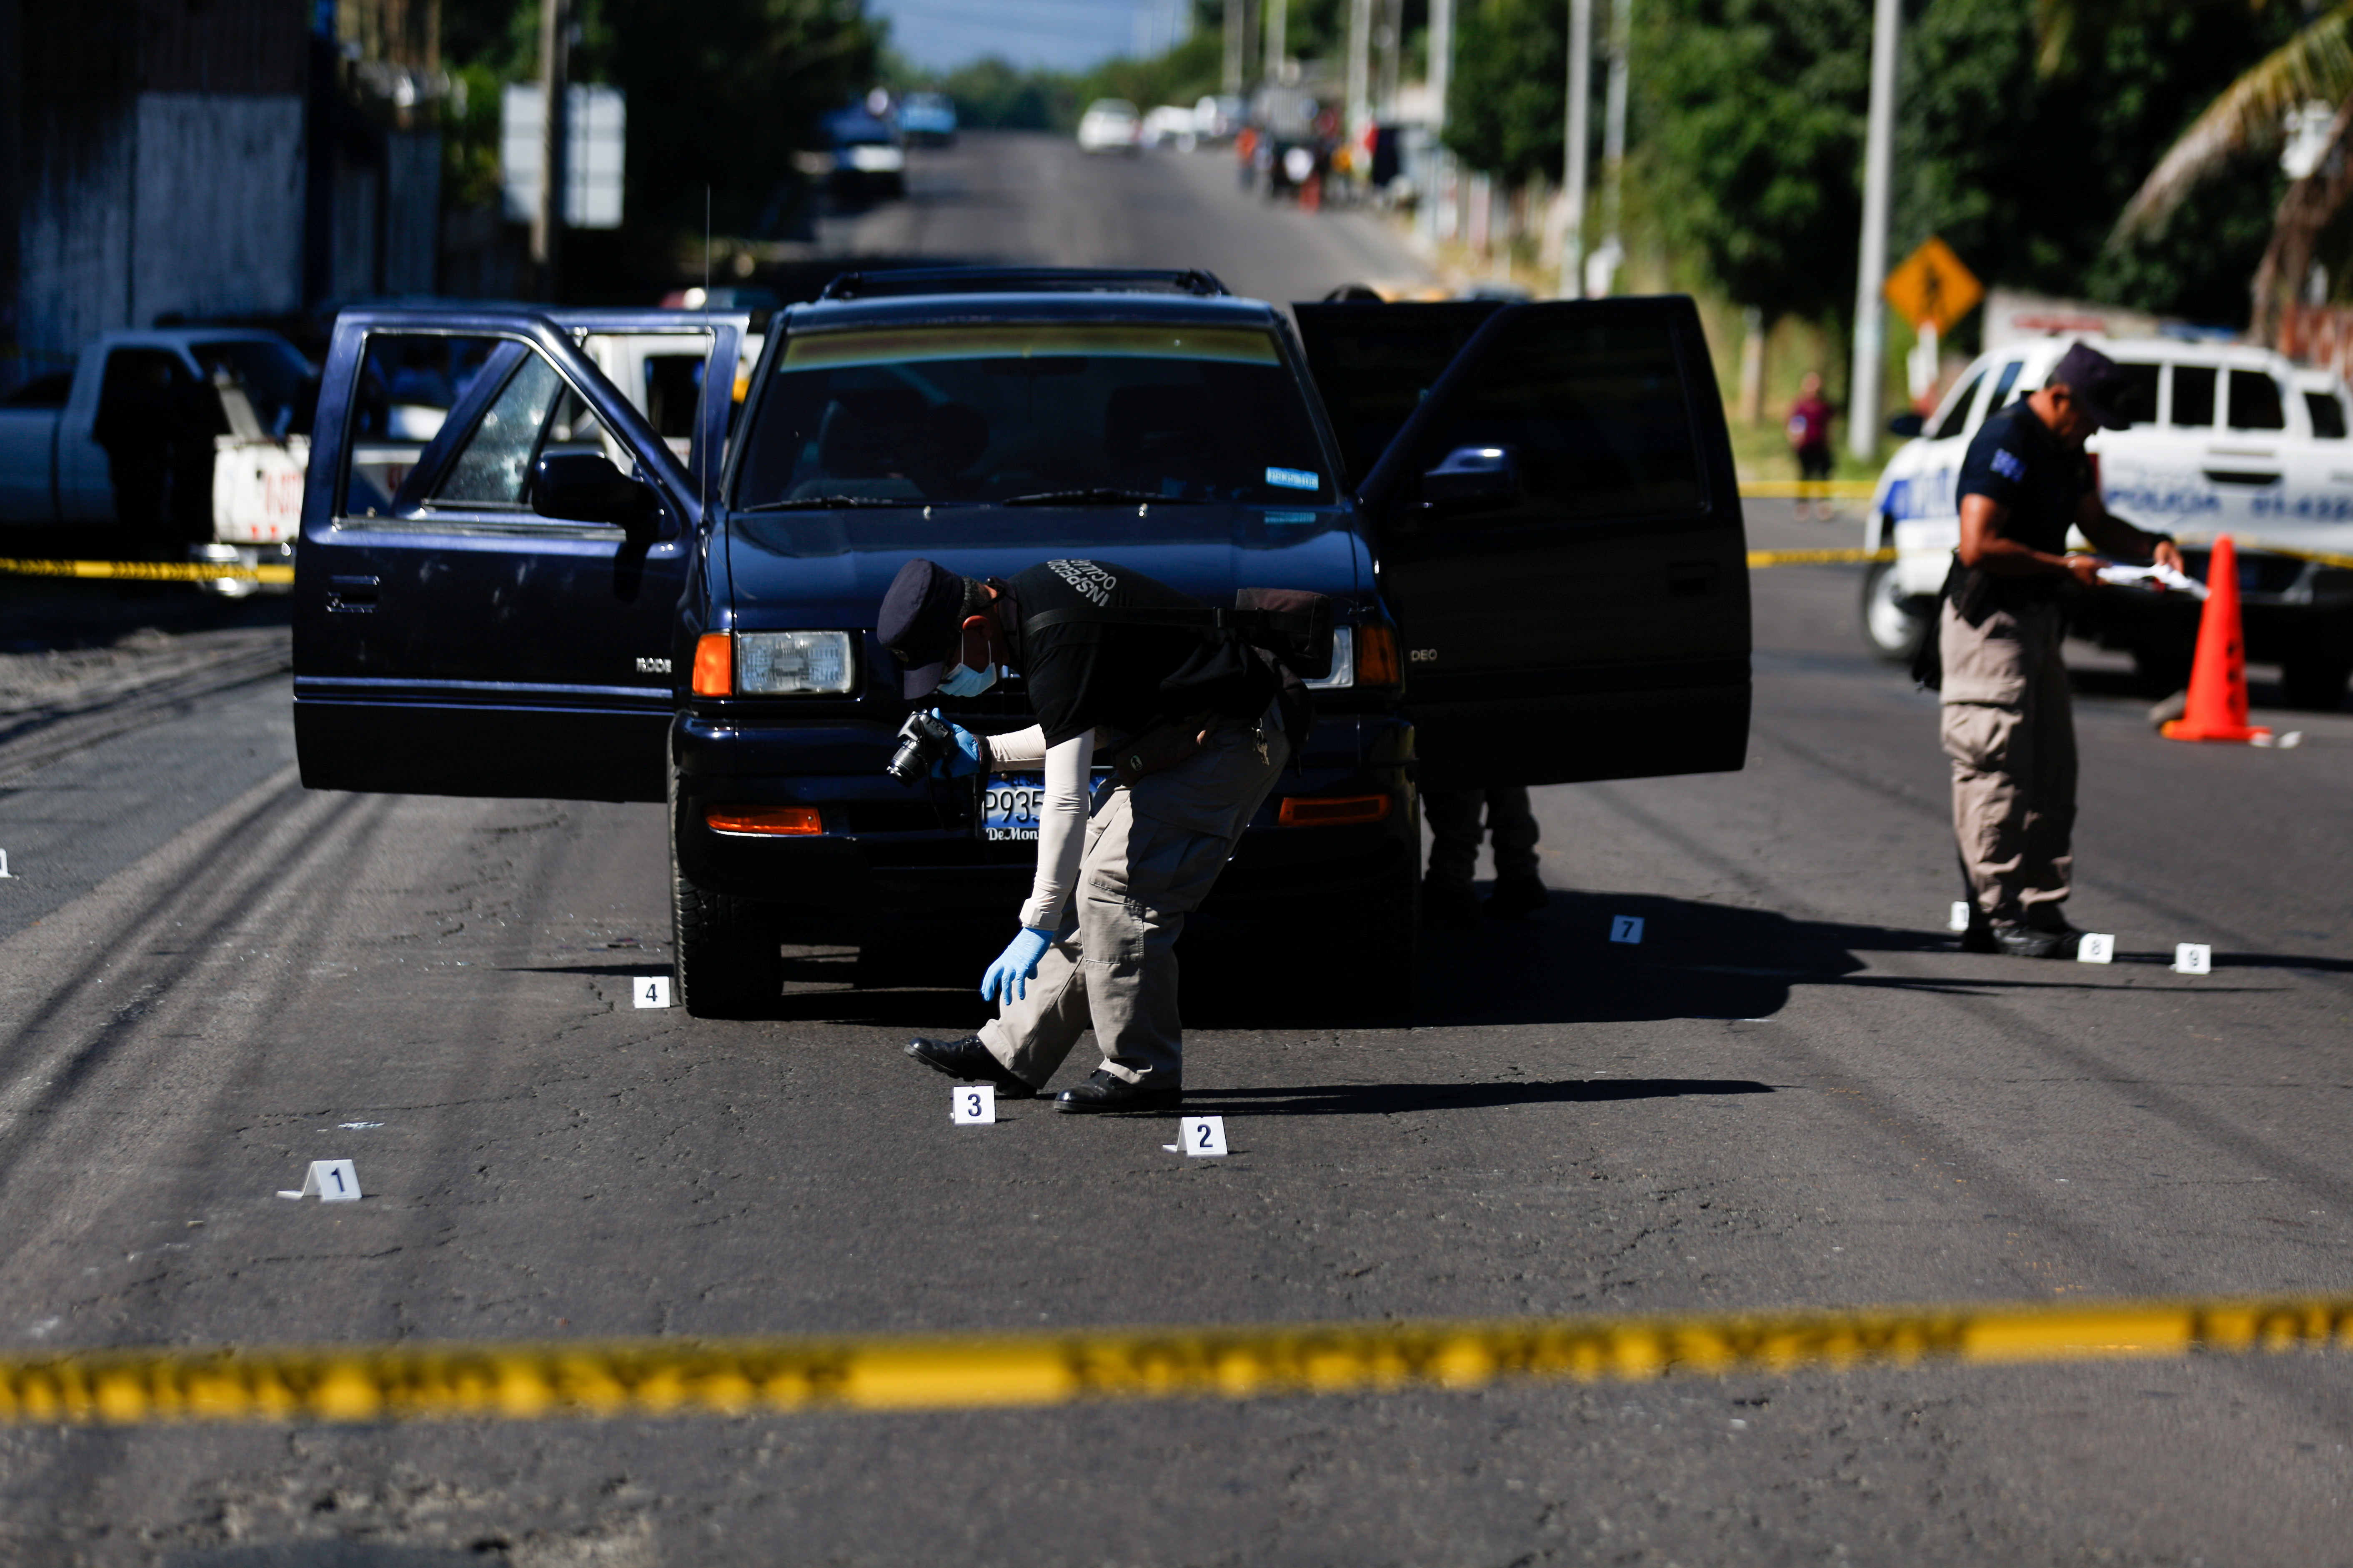 Police investigators collect evidence at a crime scene where a man was killed inside a car in San Martin